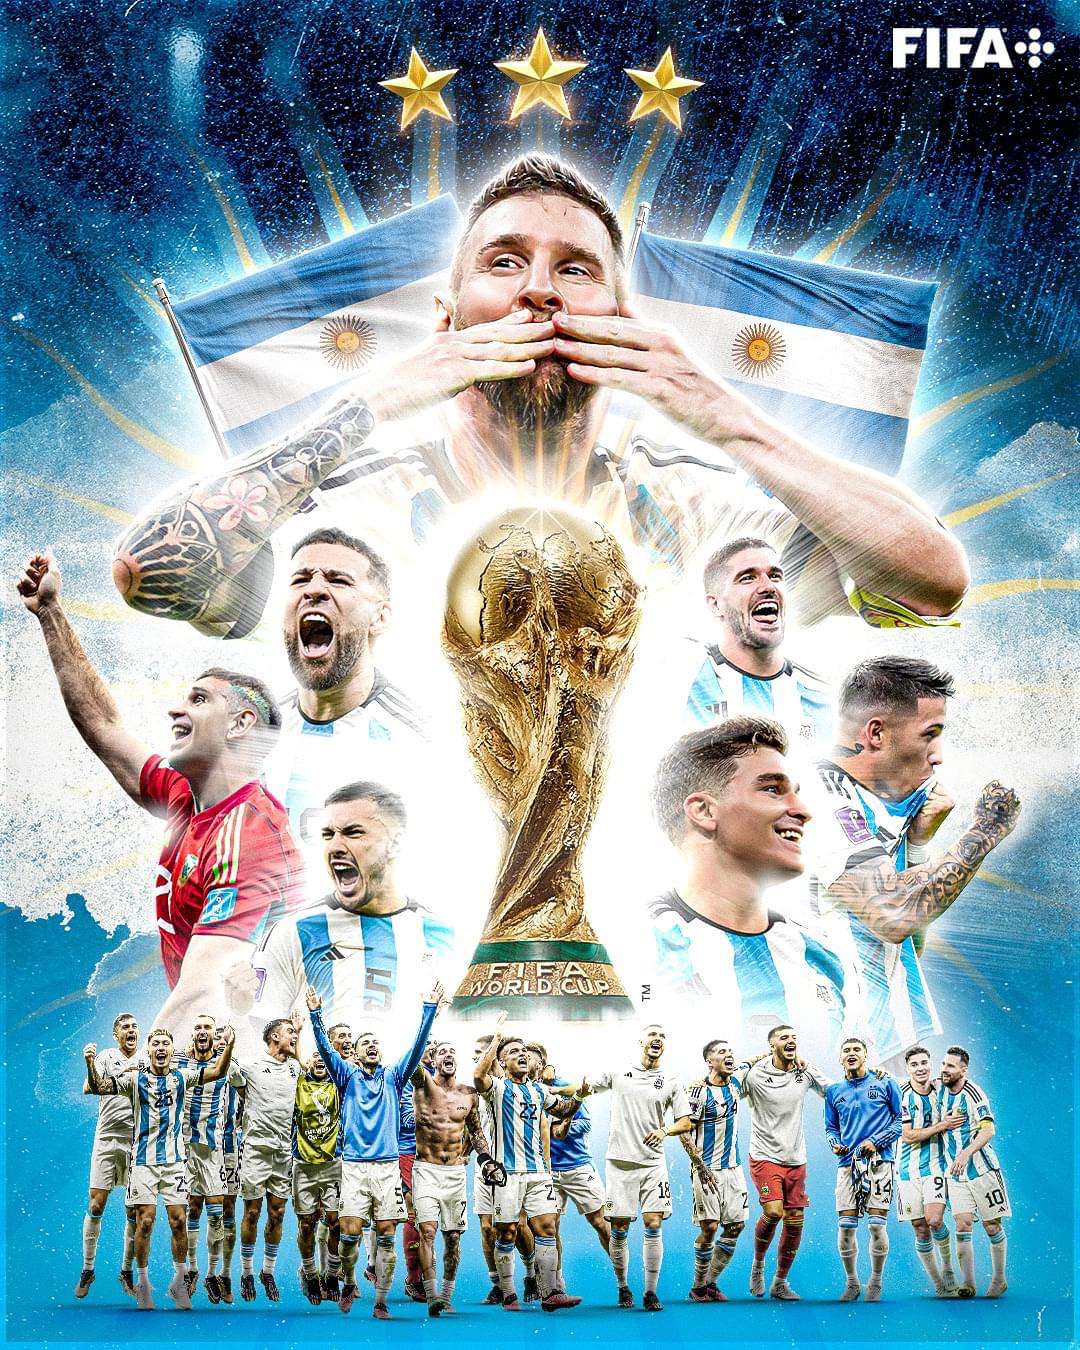 Argentina is the new World Champion